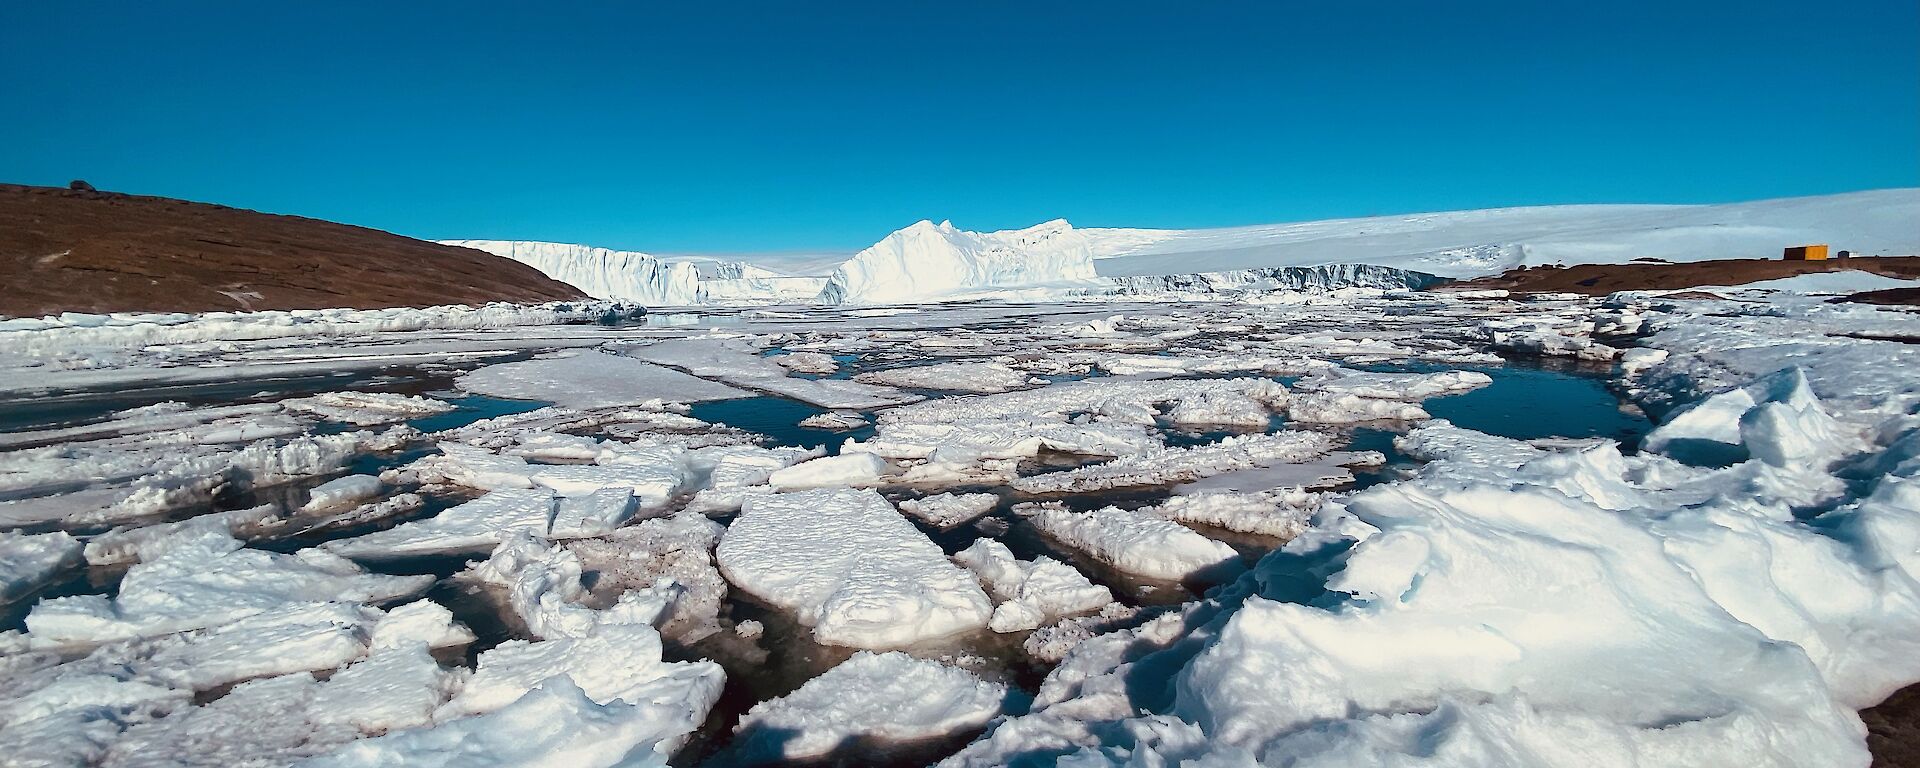 Sea Ice breaking out in the eastern bay at Mawson